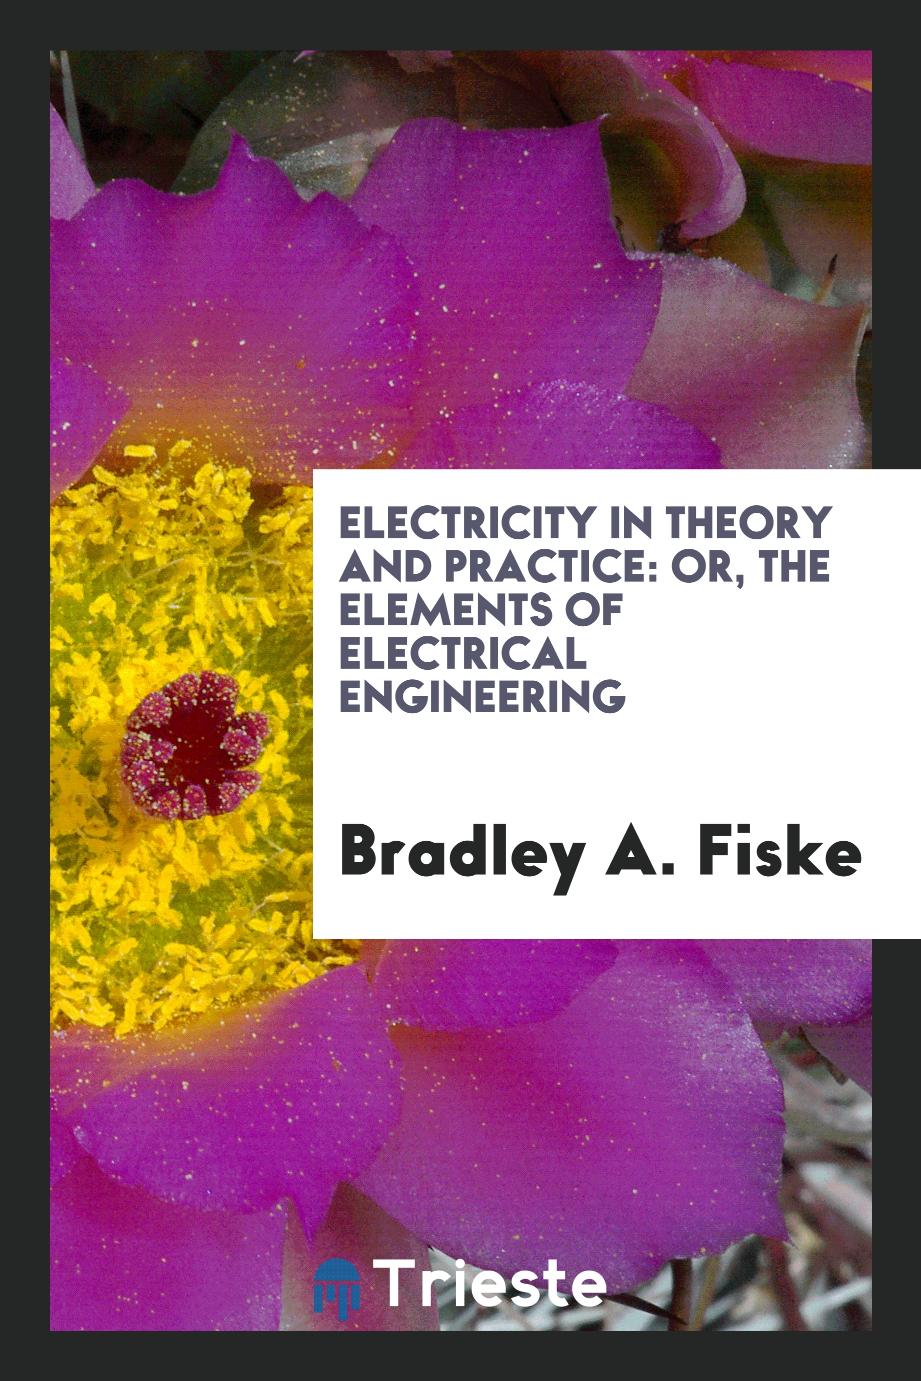 Electricity in Theory and Practice: Or, The Elements of Electrical Engineering